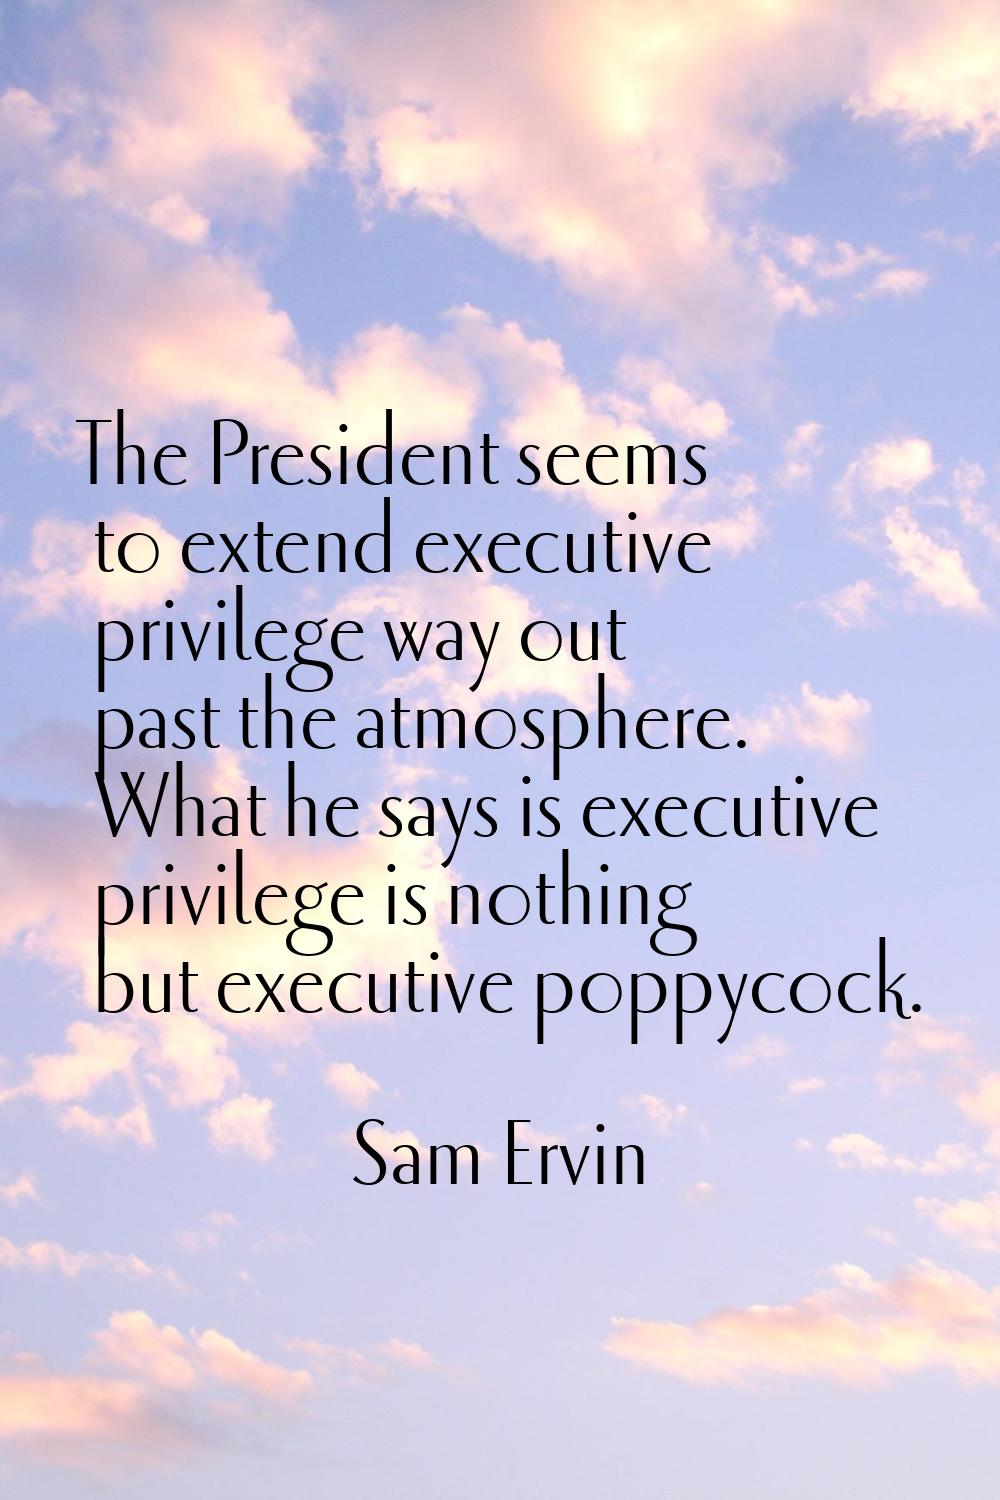 The President seems to extend executive privilege way out past the atmosphere. What he says is exec